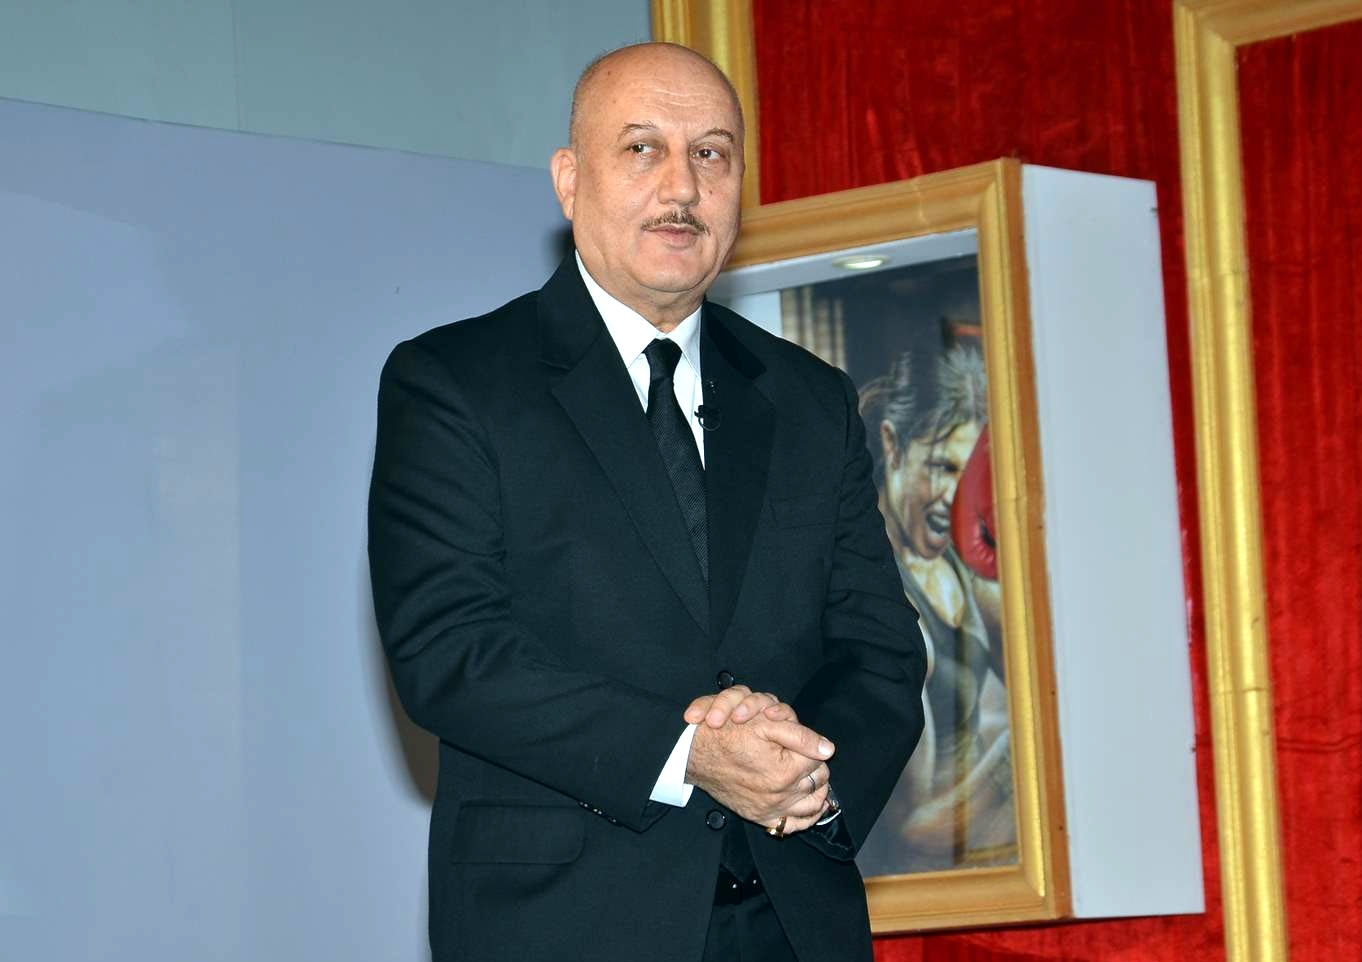 Actor Anupam Kher. (File Photo: IANS) by .